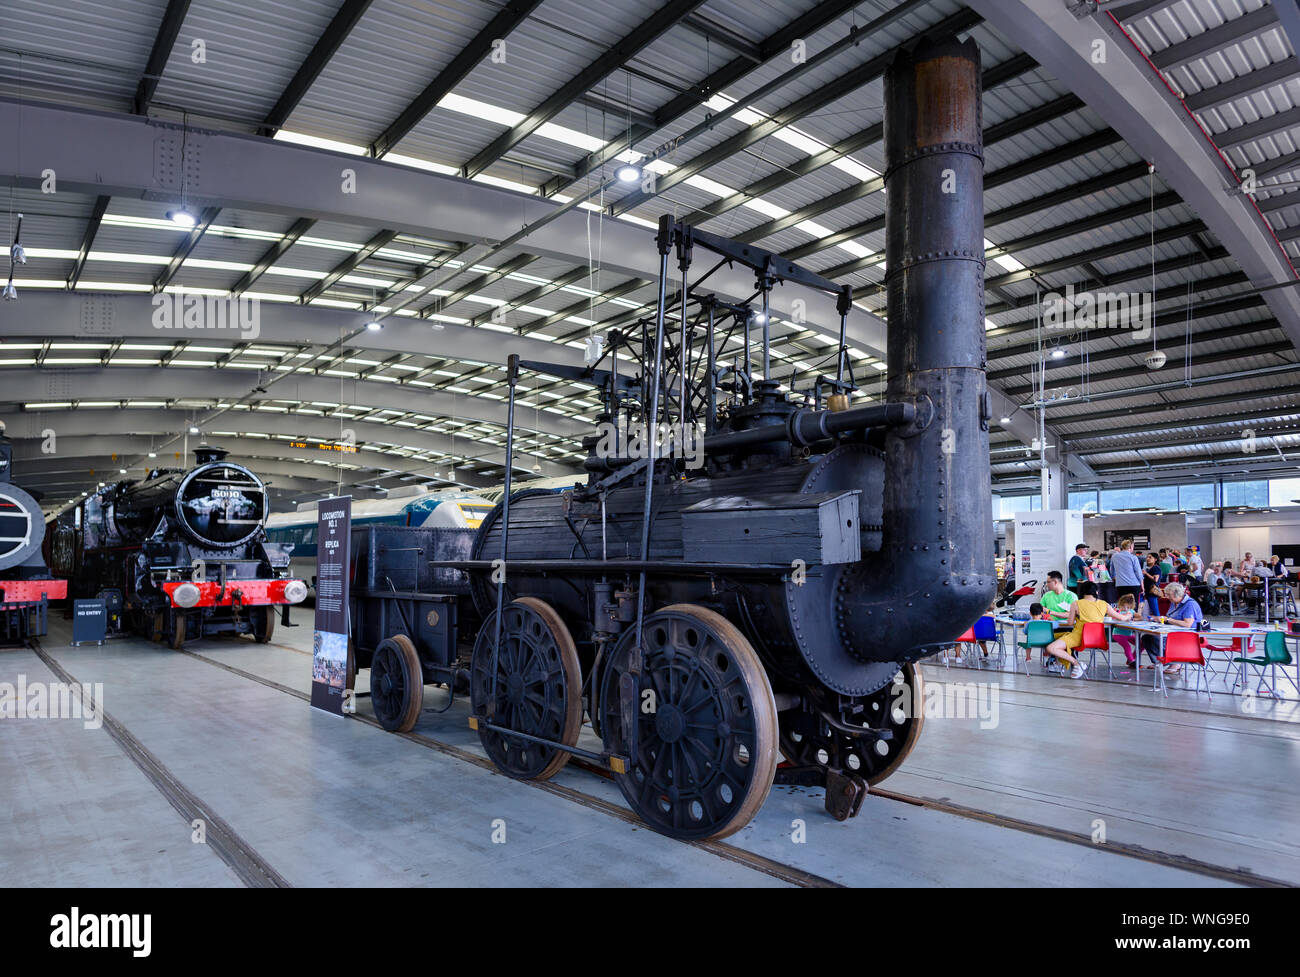 Locomotion No 1 replica early steam locomotive at the National Railway Museum in Shildon Stock Photo